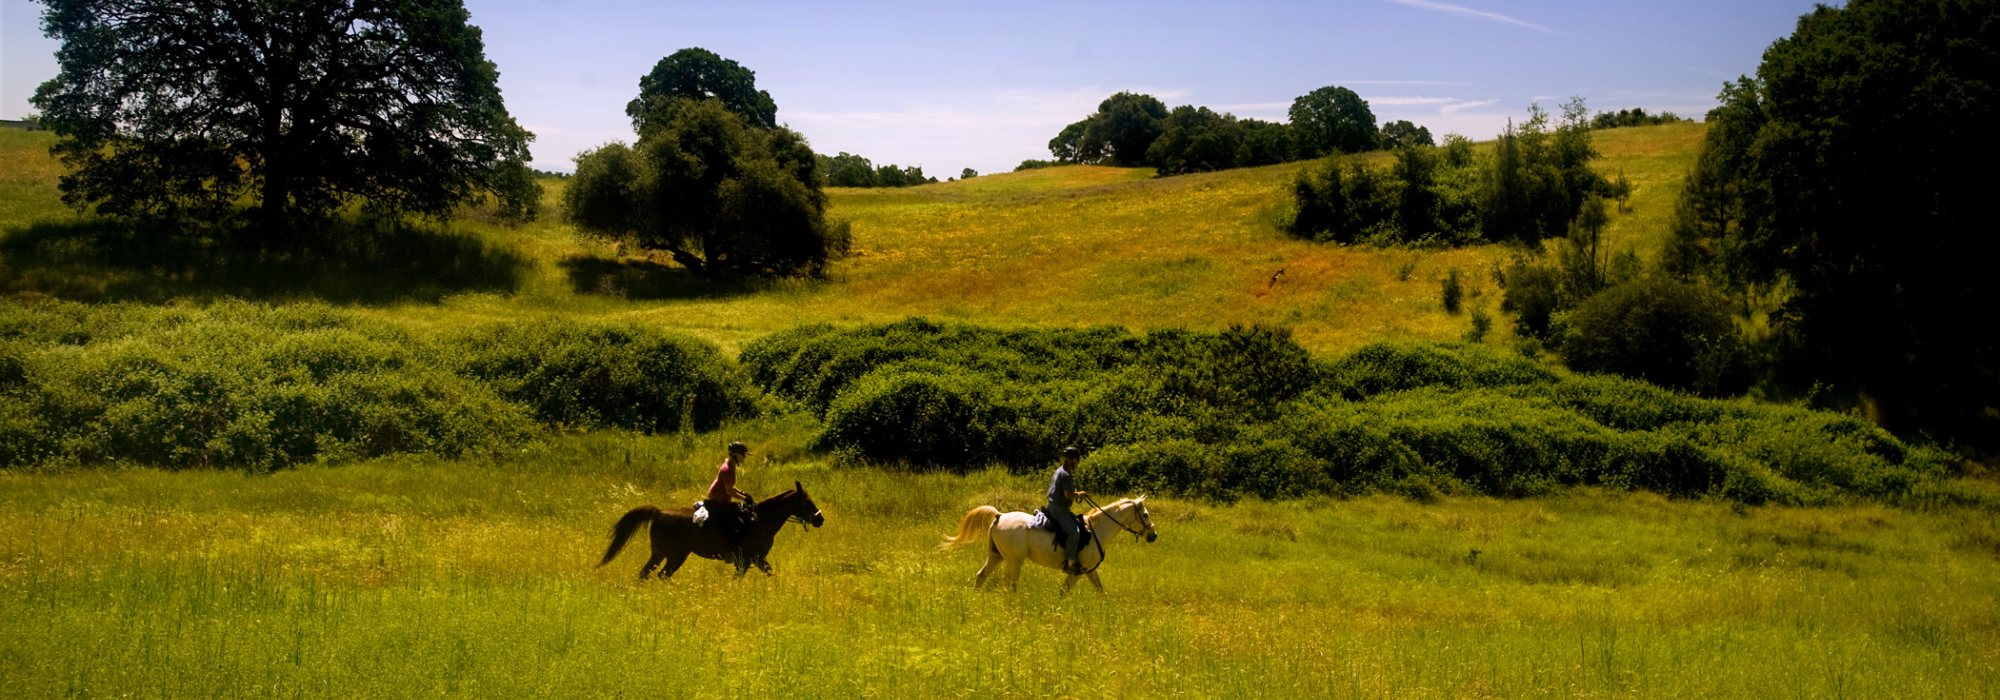 Horses galloping the fields